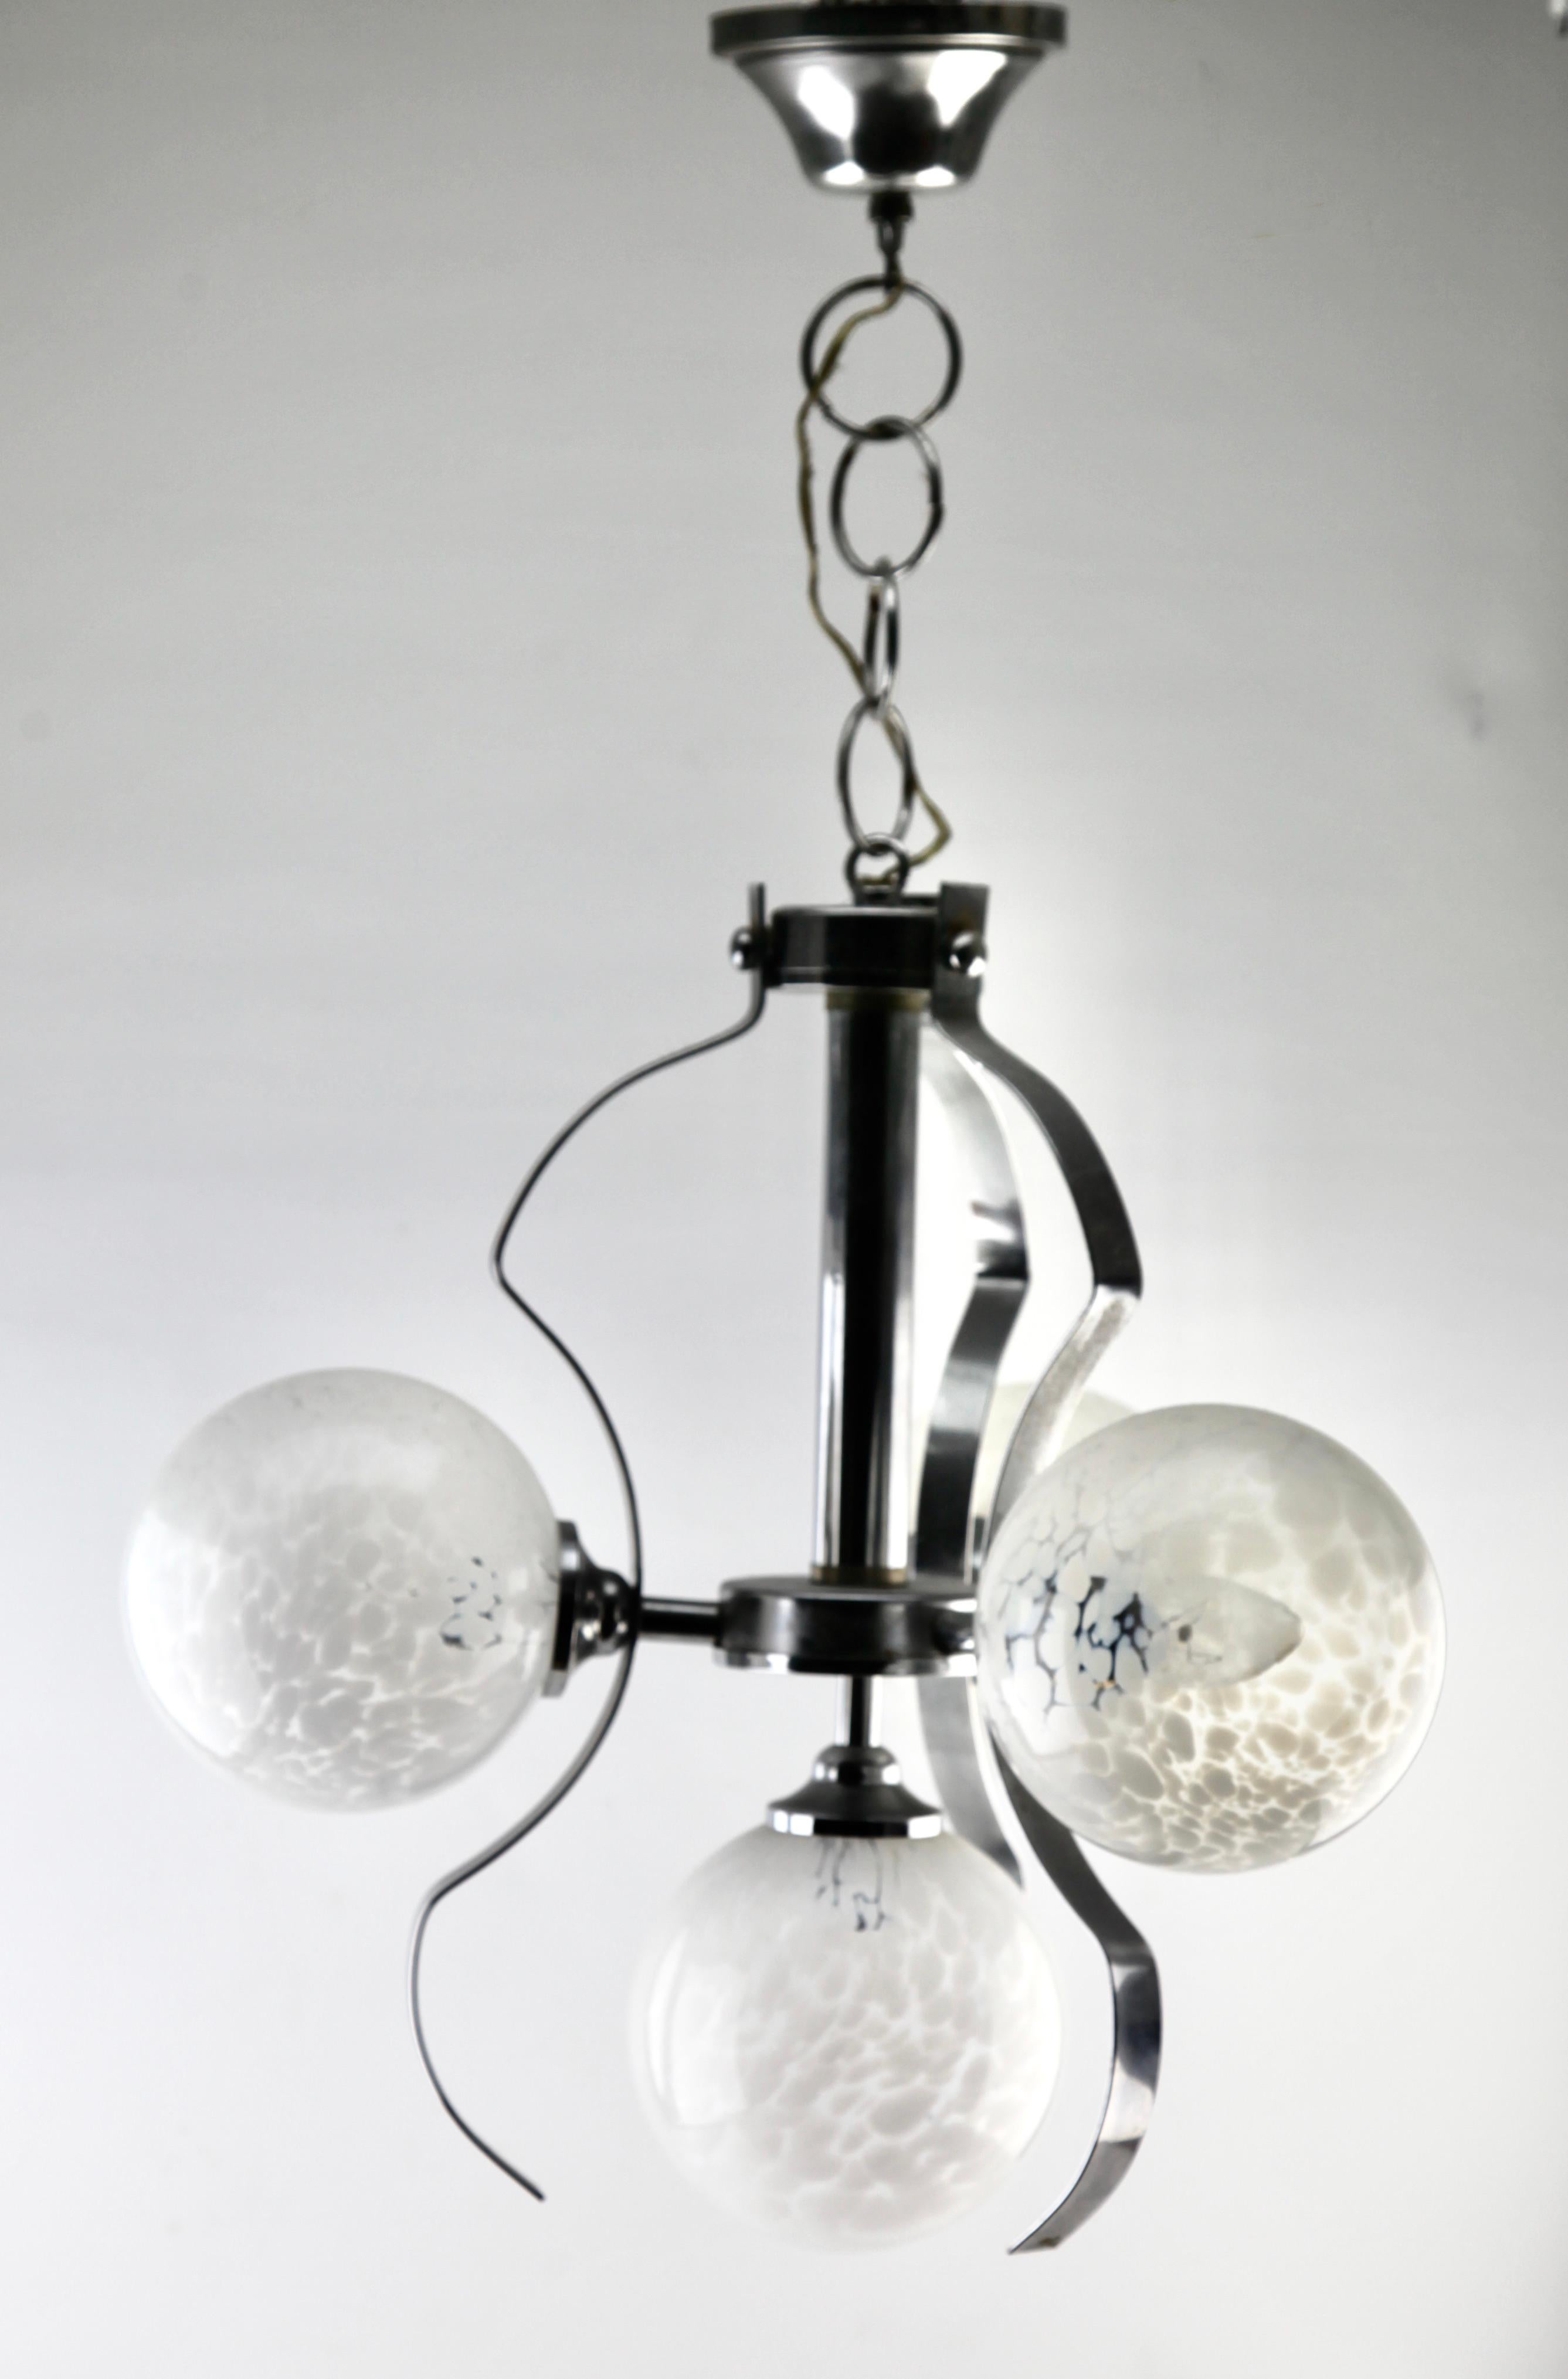 Fischer Leuchten ‘Germany’ Swirl Ball Pendant Stem Lamp with 3 Globular Lights In Good Condition For Sale In Verviers, BE